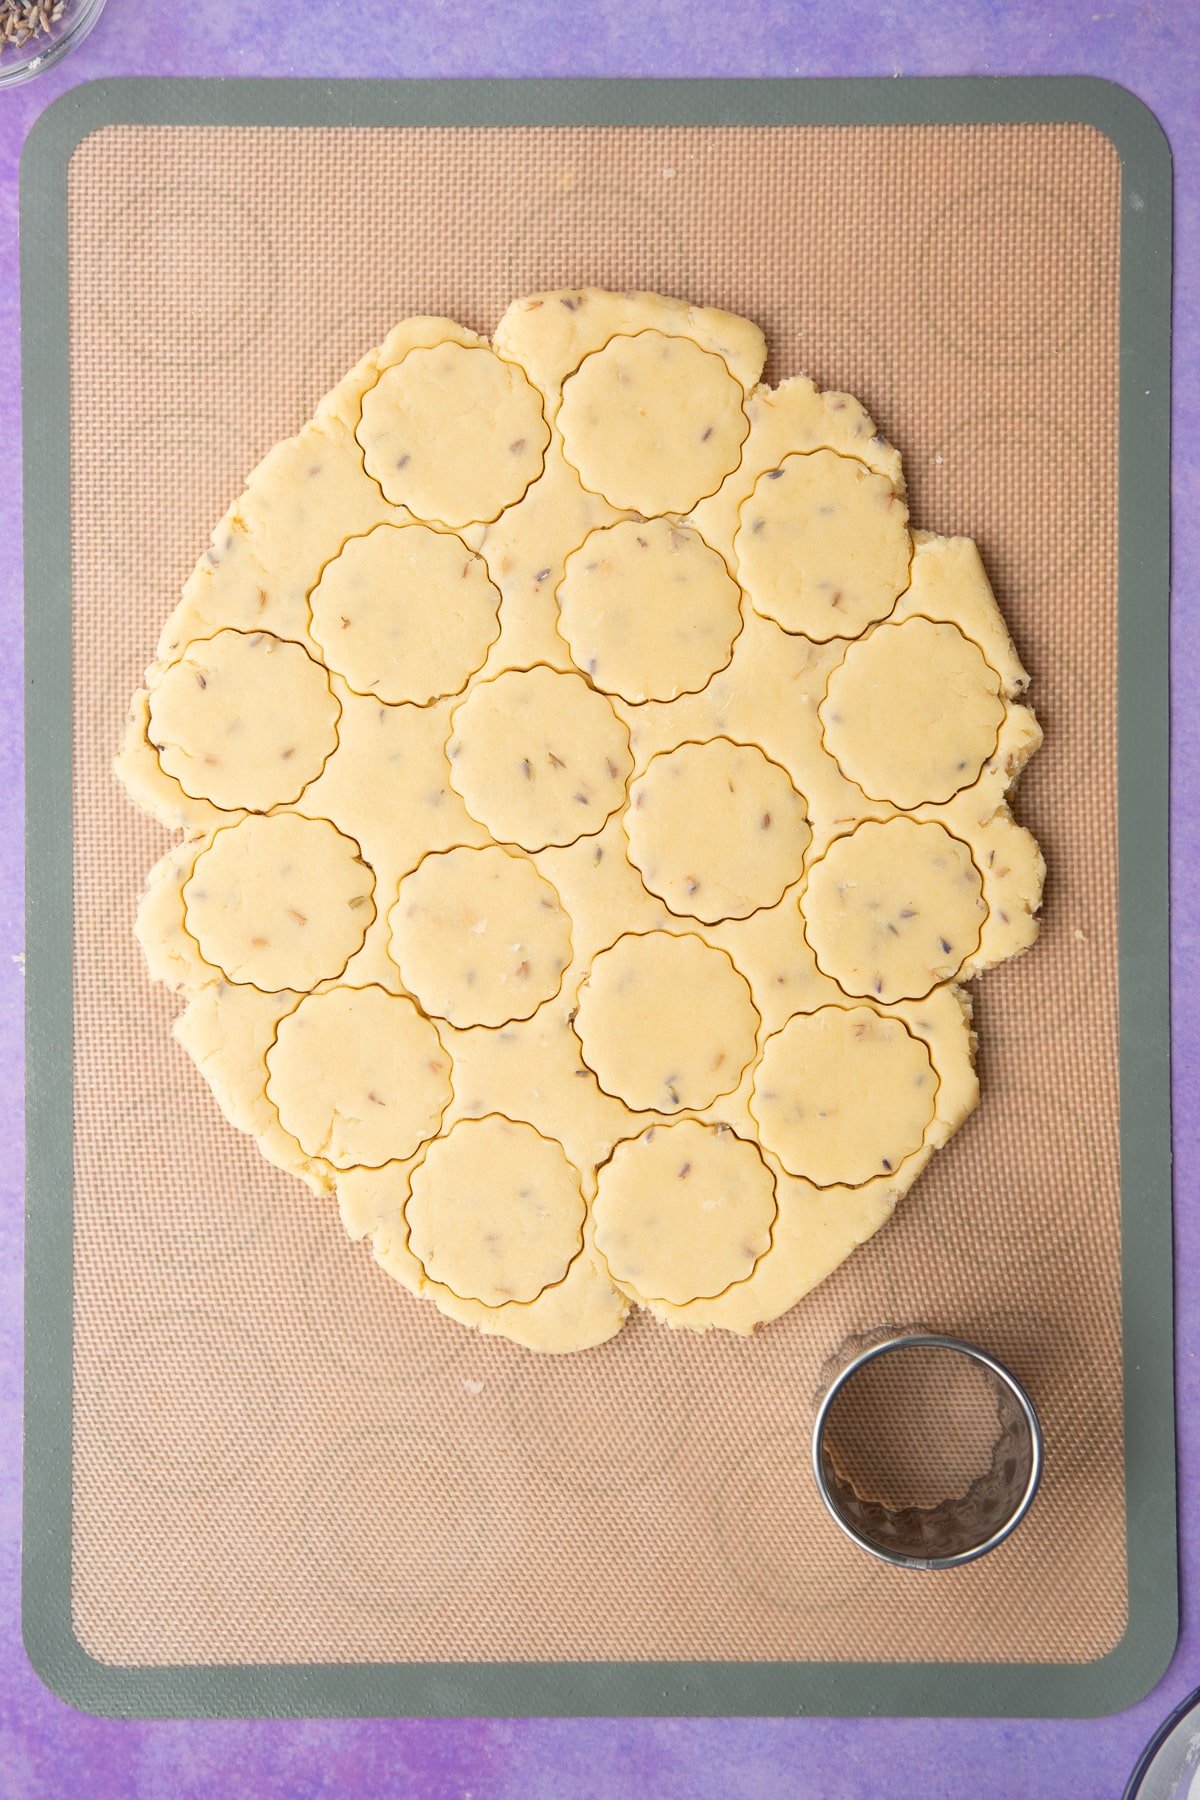 Lavender shortbread cookie dough rolled out on a matt with rounds cut out.